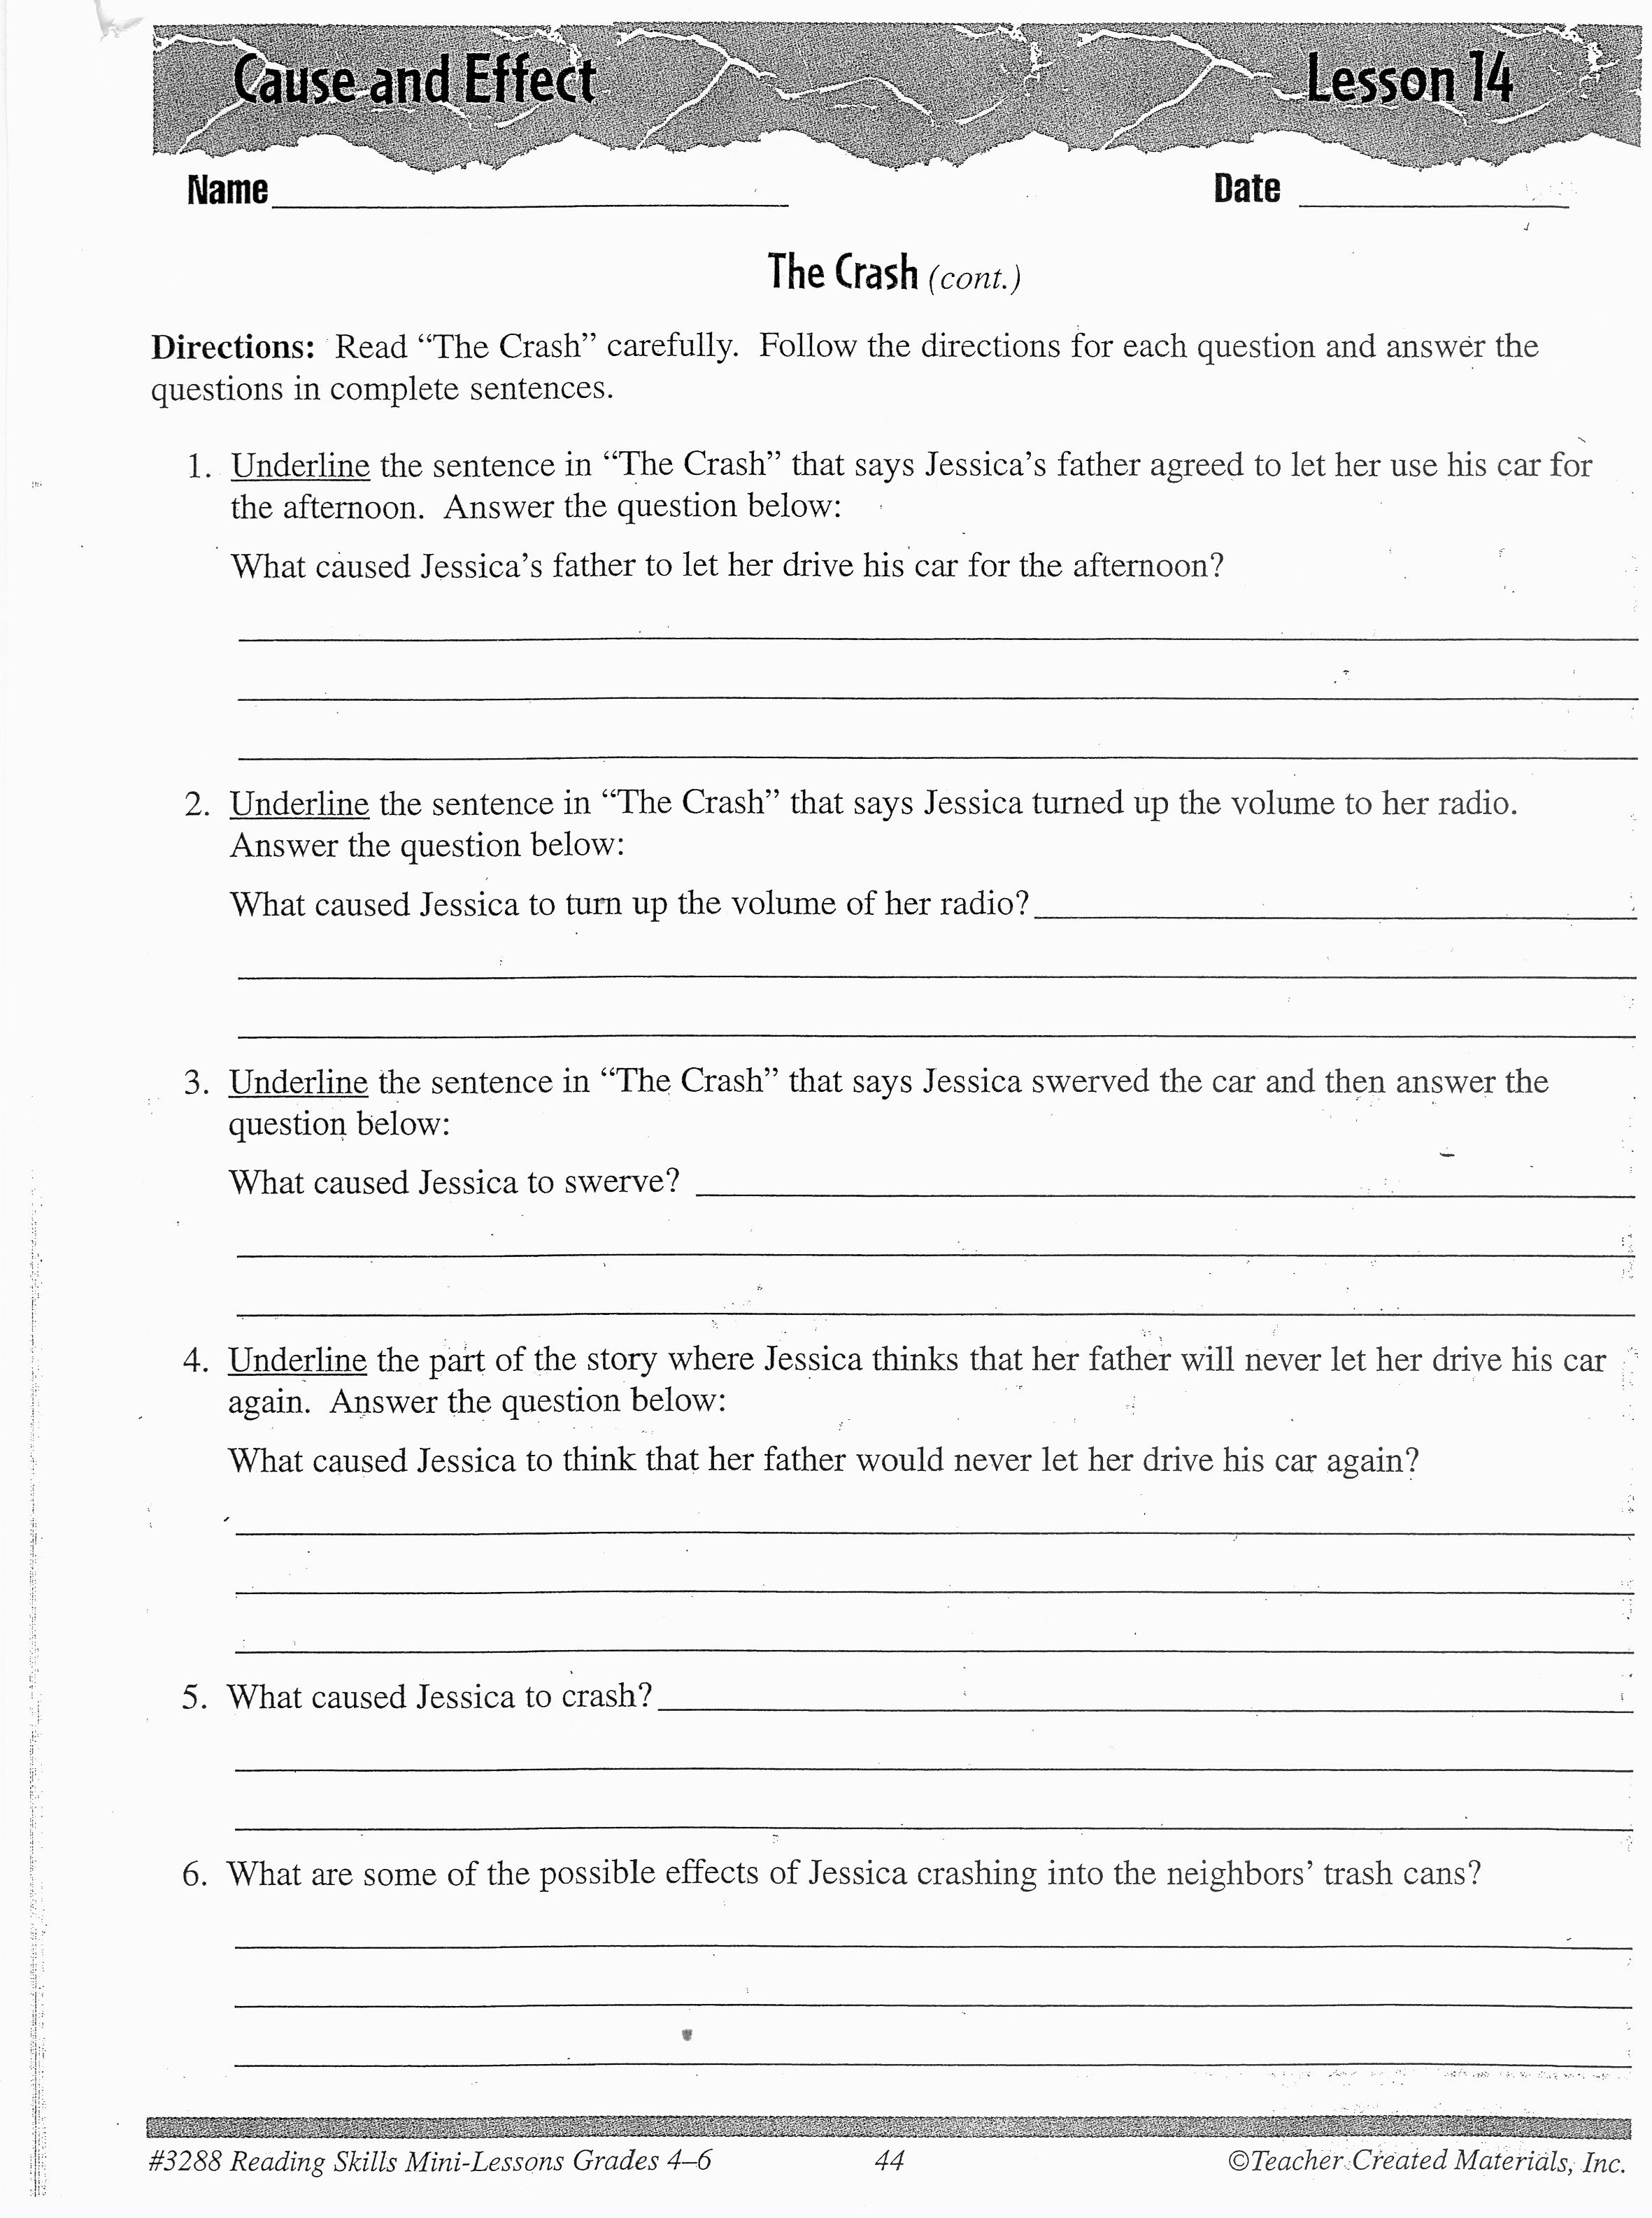 Cause and Effect Essay Examples Middle School